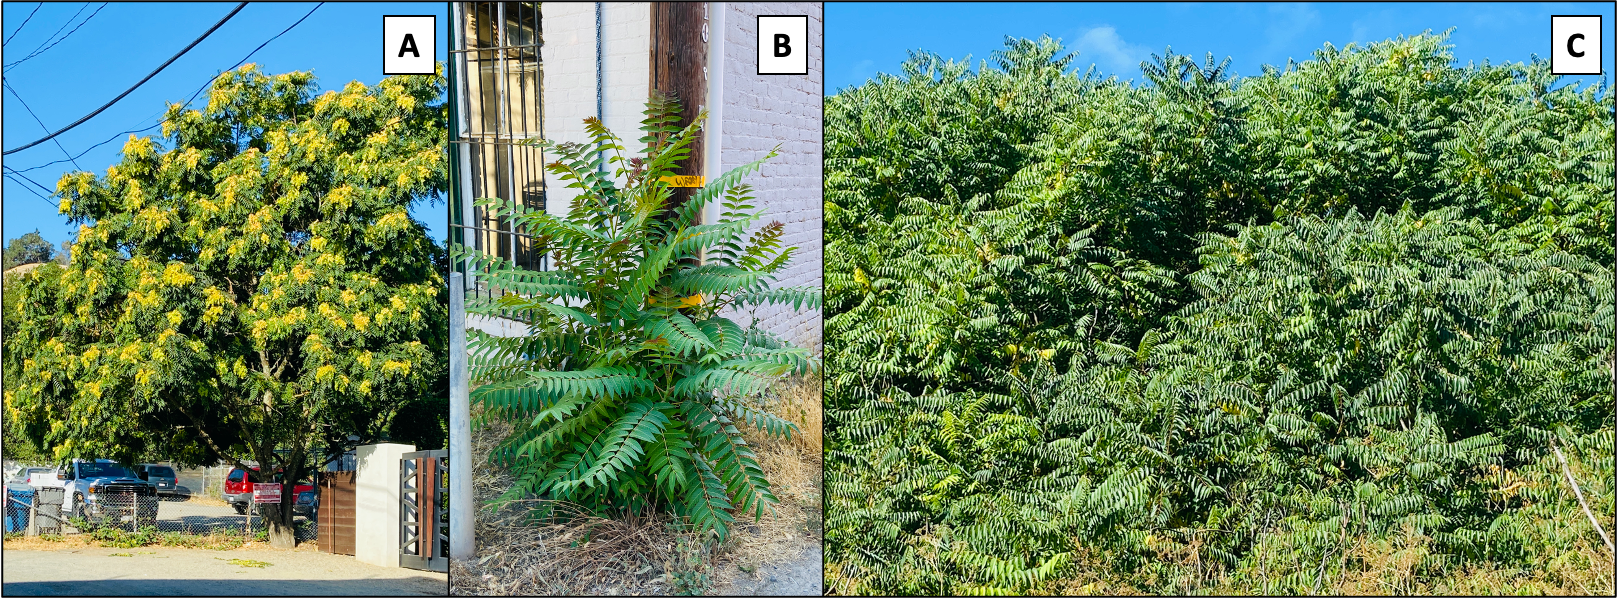 Figure 1. Tree-of-heaven is a deciduous tree that can be found in agricultural, urban, riparian and disturbed forested areas.